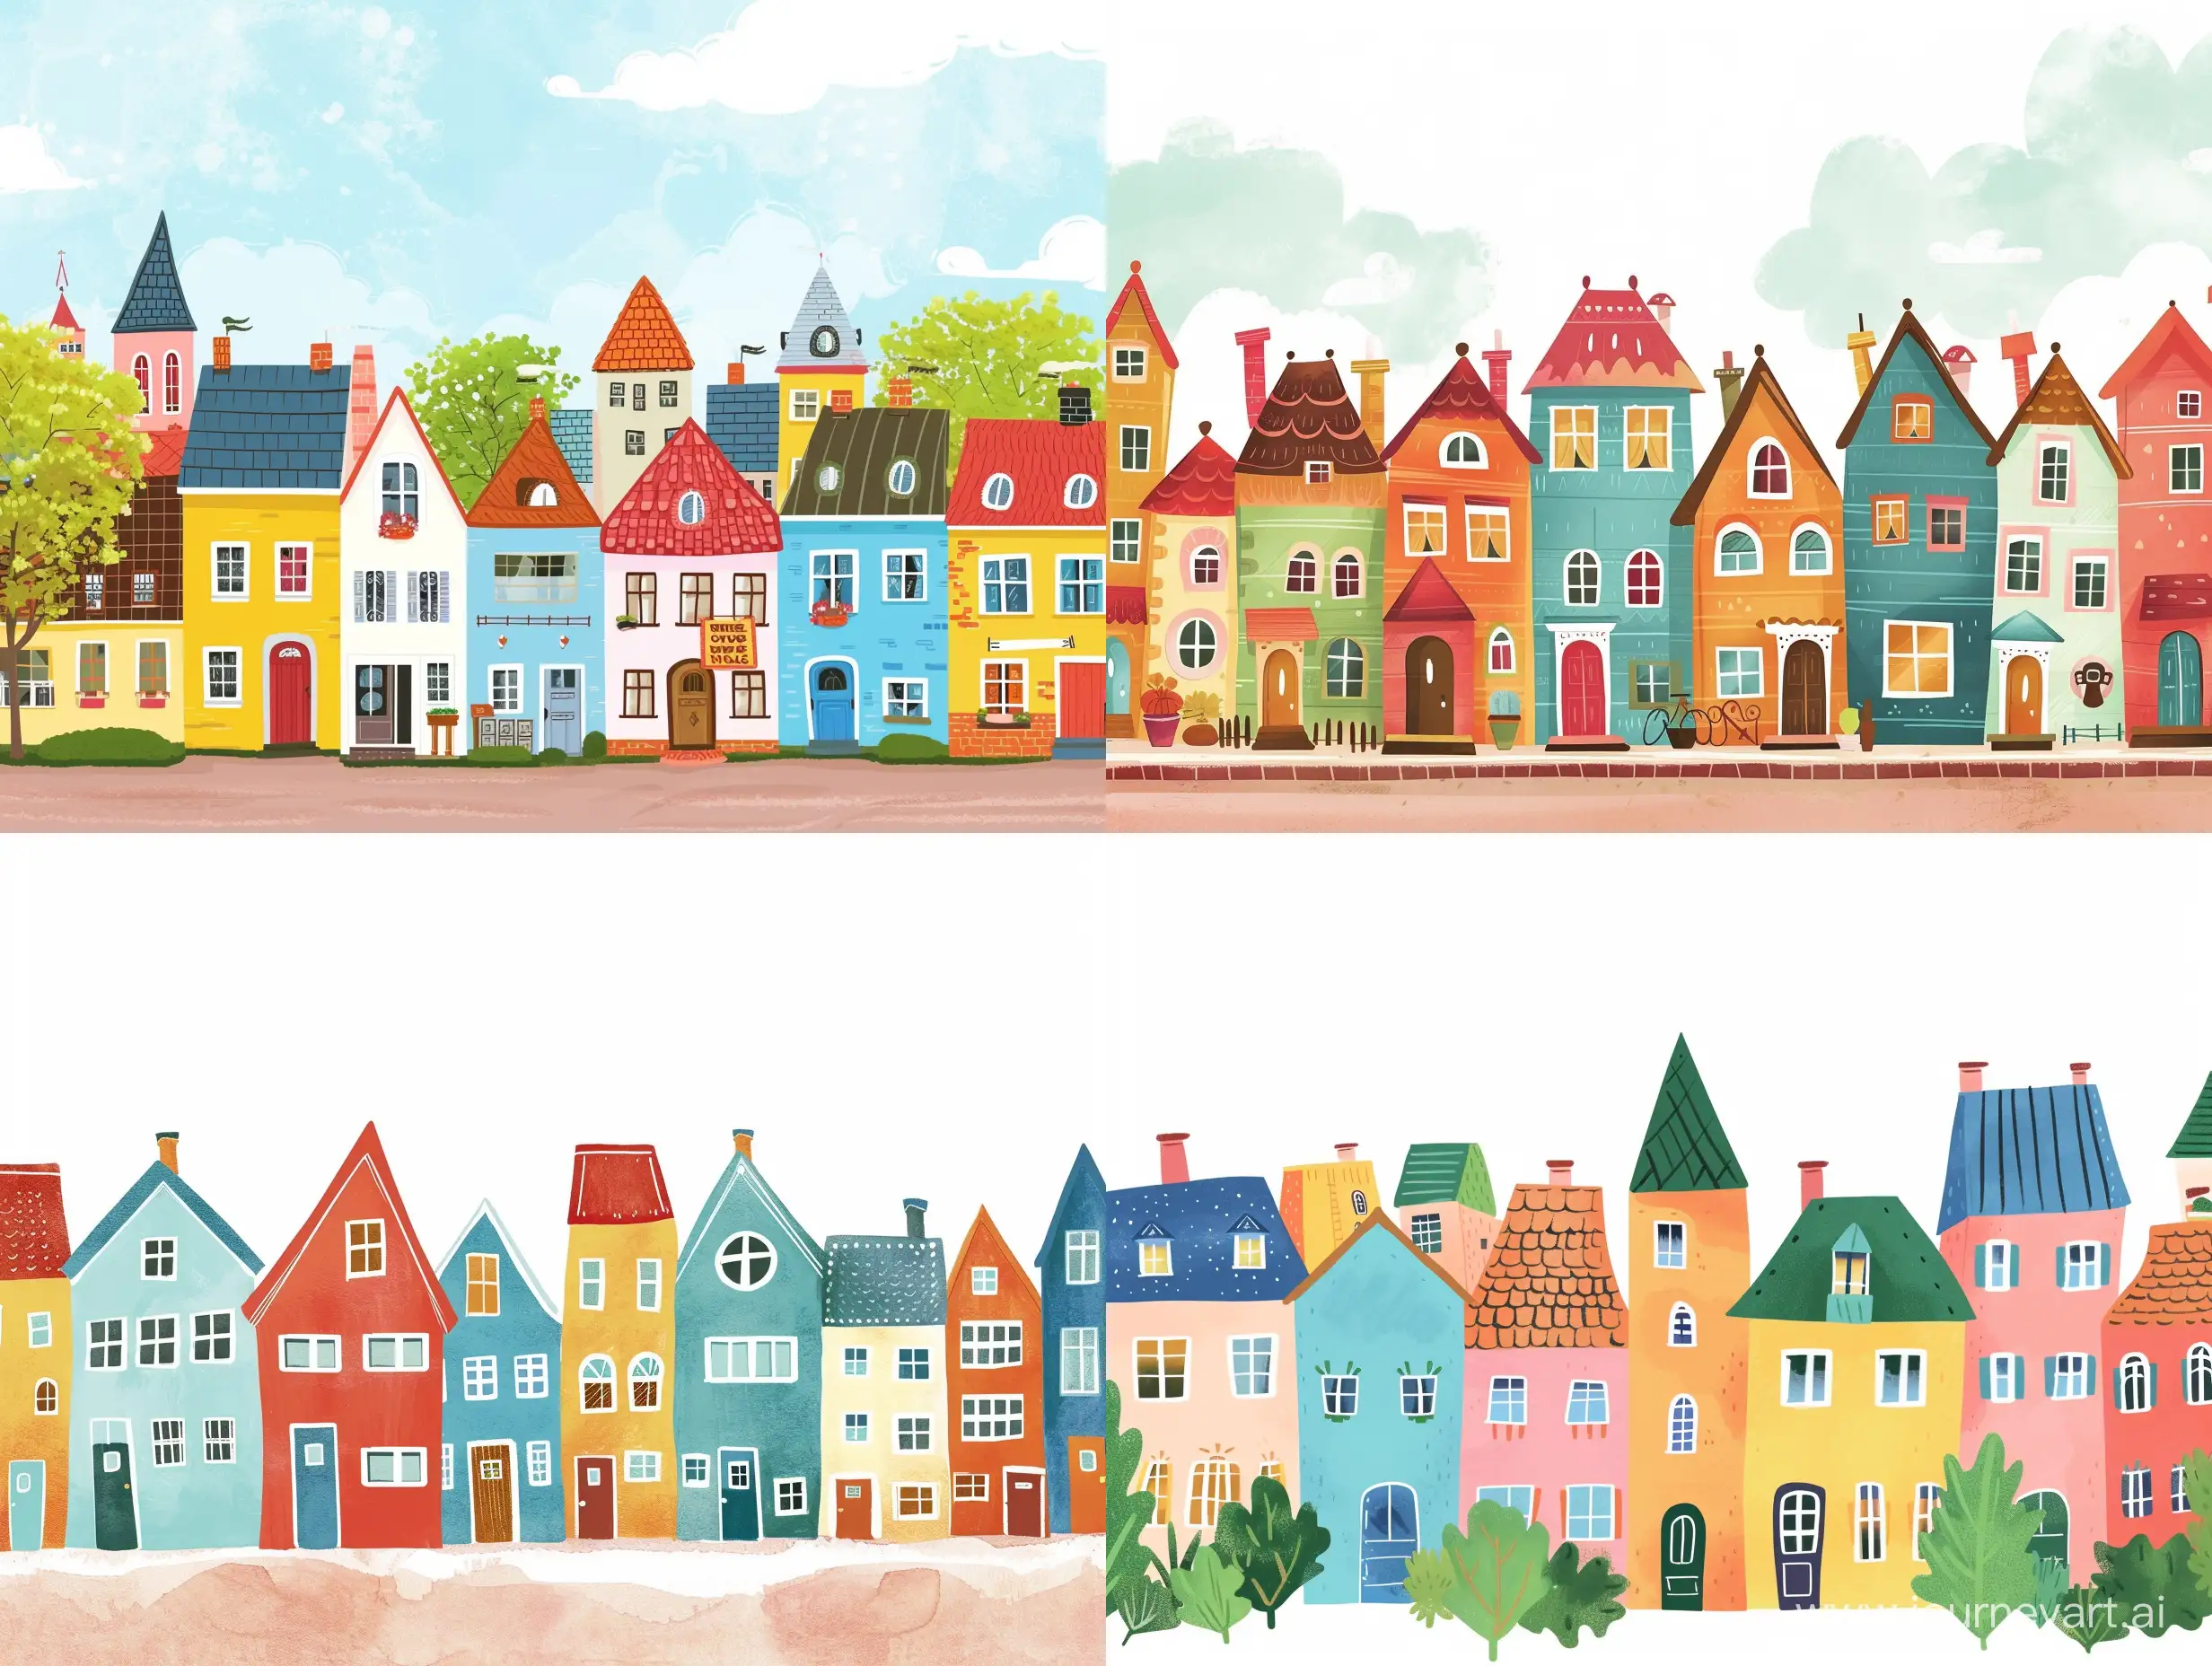 
colorful houses like a beautiful town for using as a background, illustration style, not much details, not childish style and not very cartoony, 